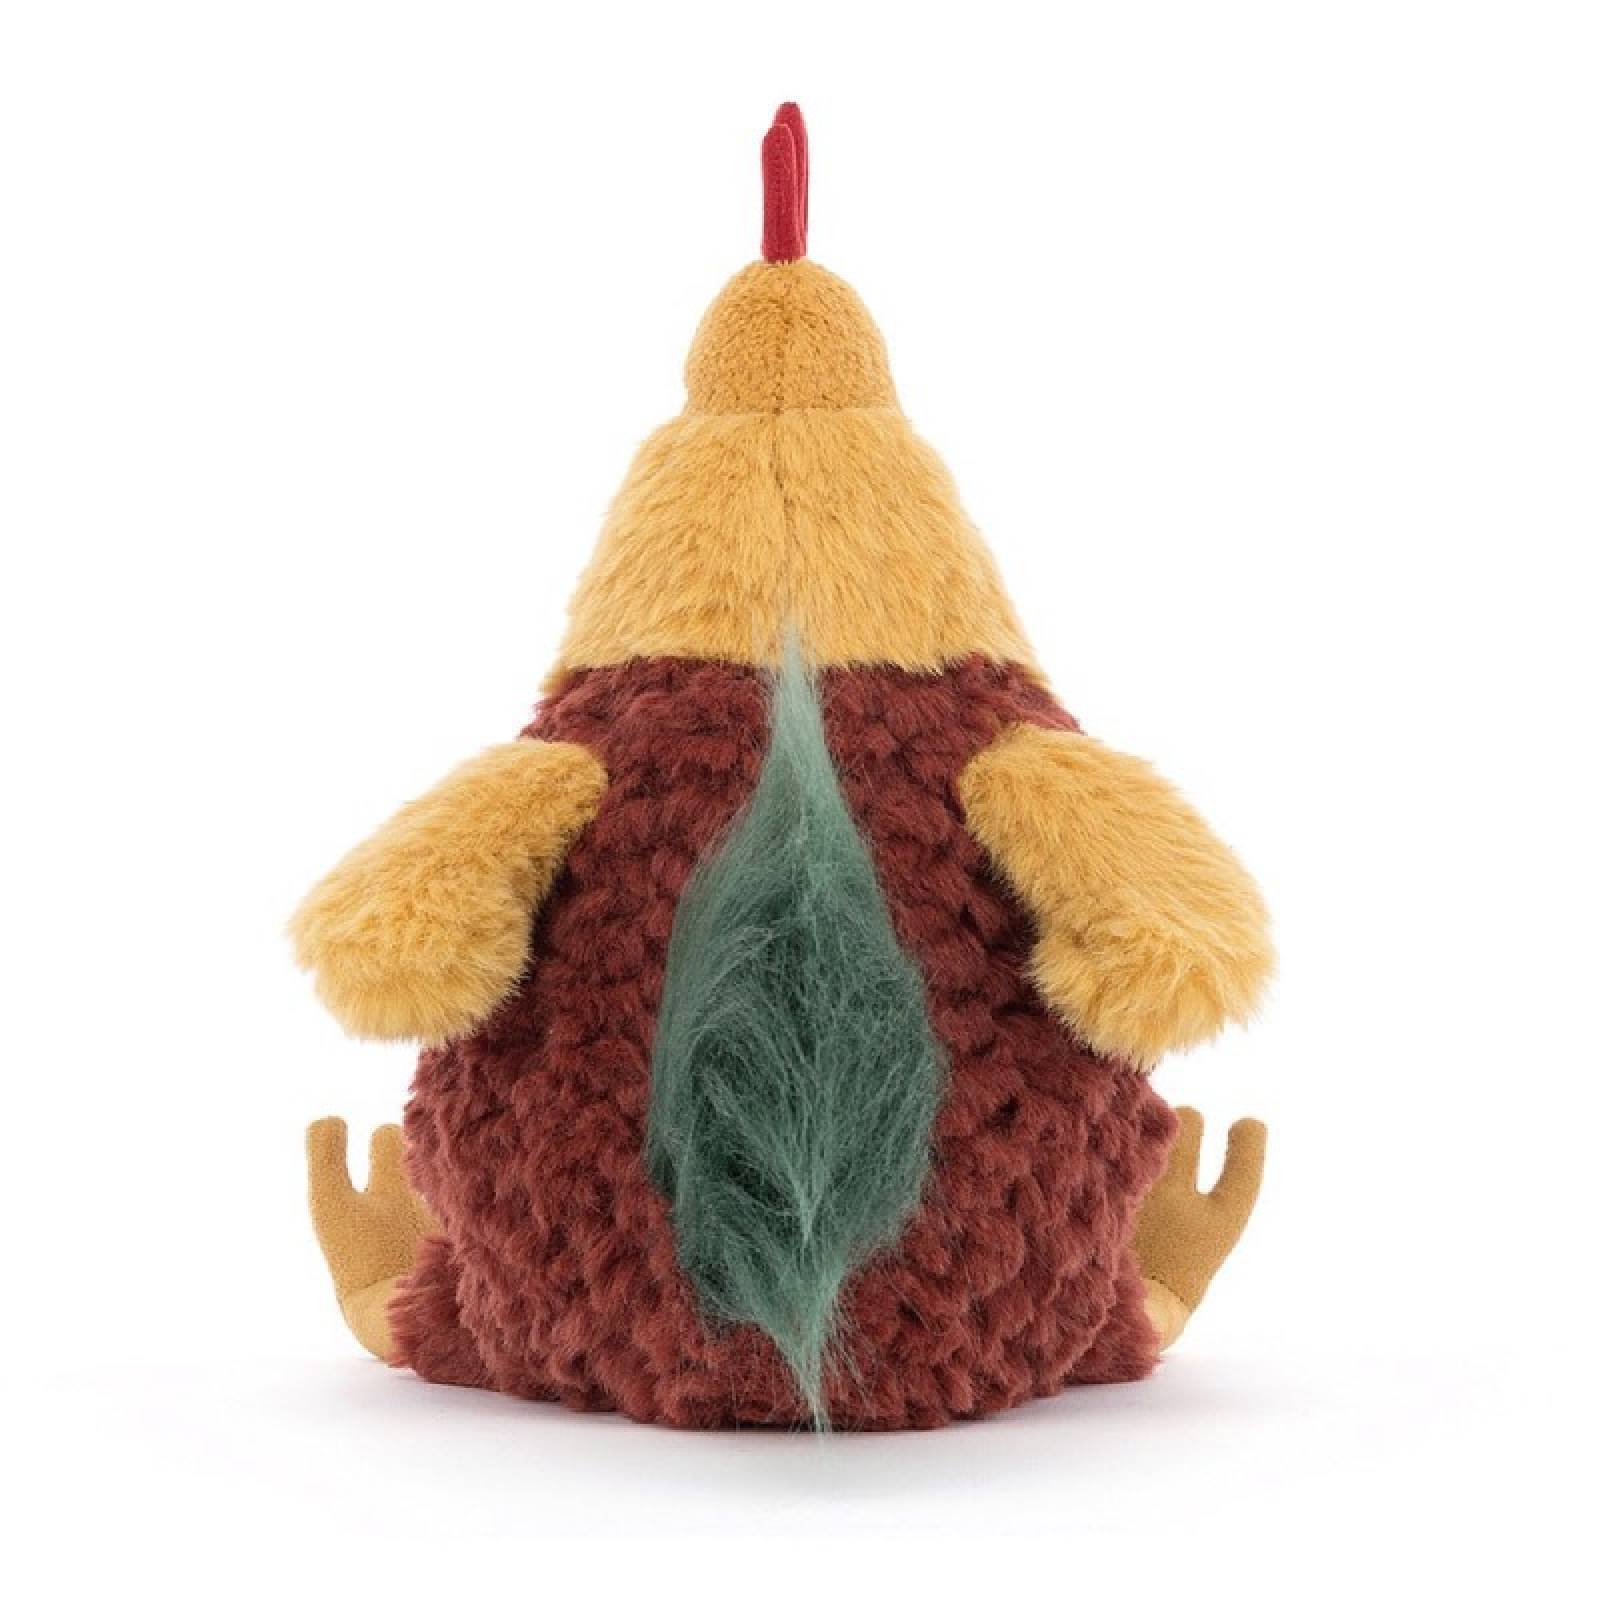 Cluny Cockerel Soft Toy By Jellycat 1+ thumbnails